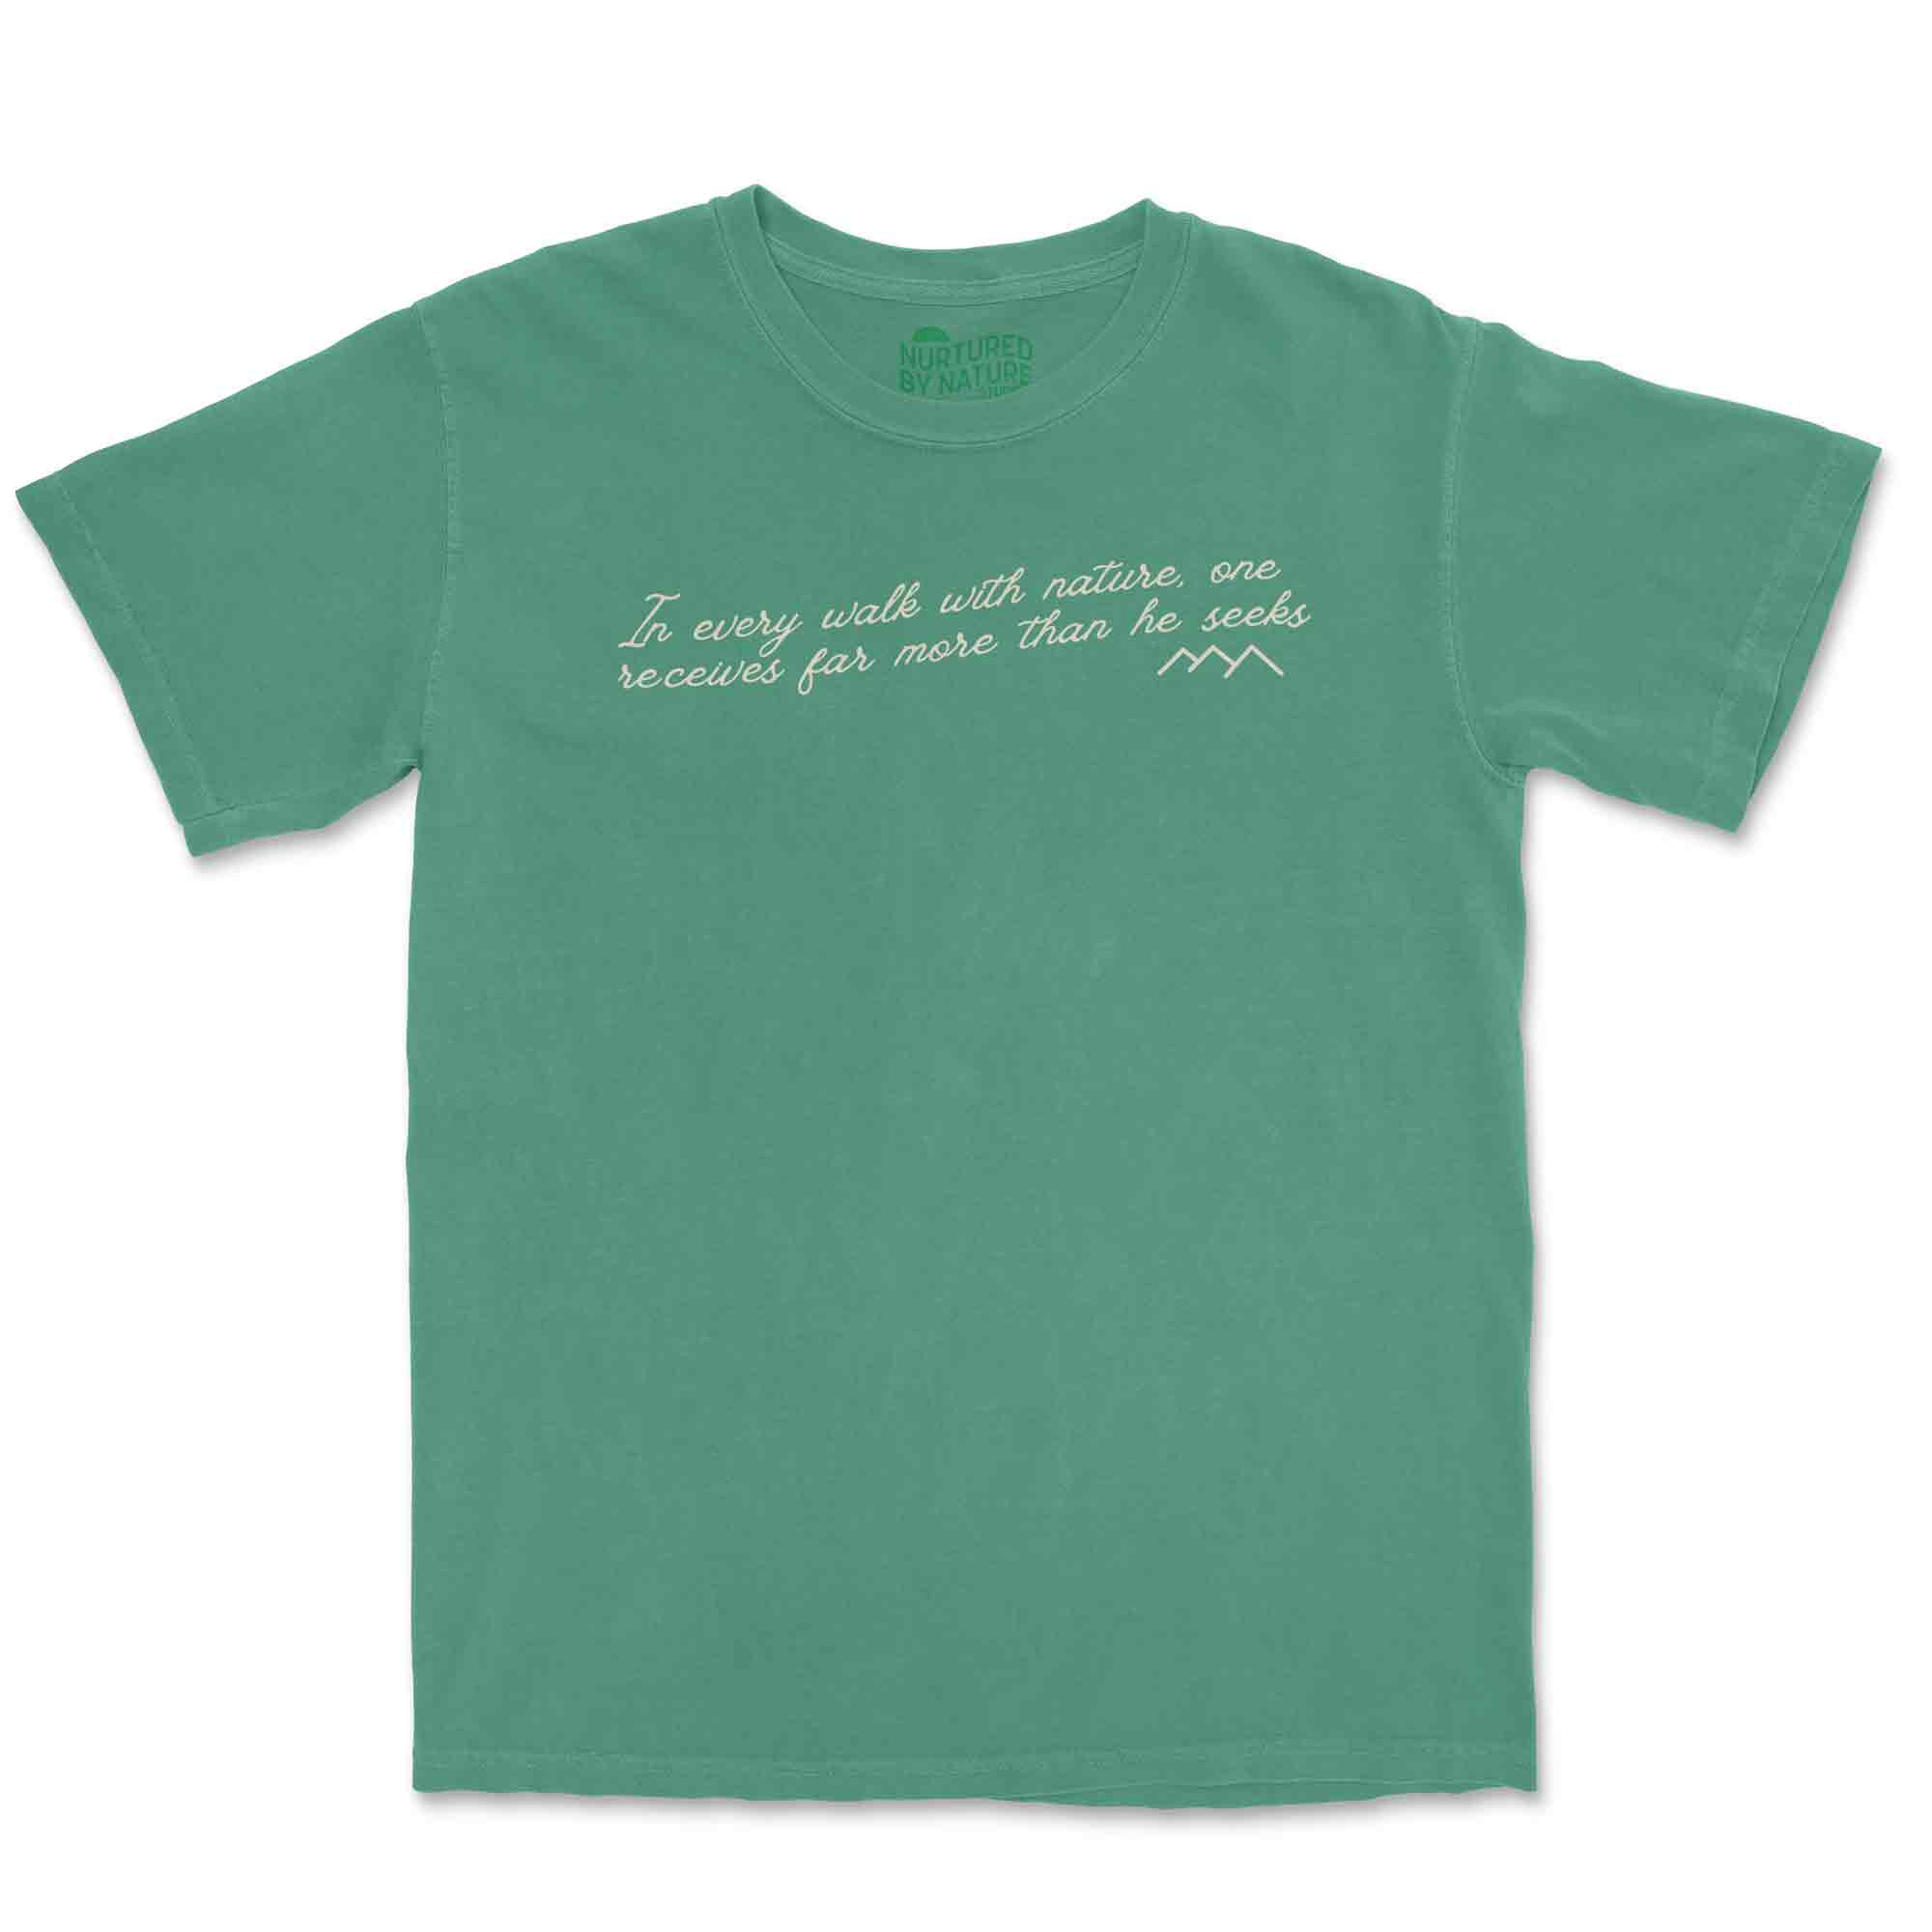 In Every Walk with Nature One Received Far More Than He Seeks Quote T-Shirt Nurtured by Nature Studio